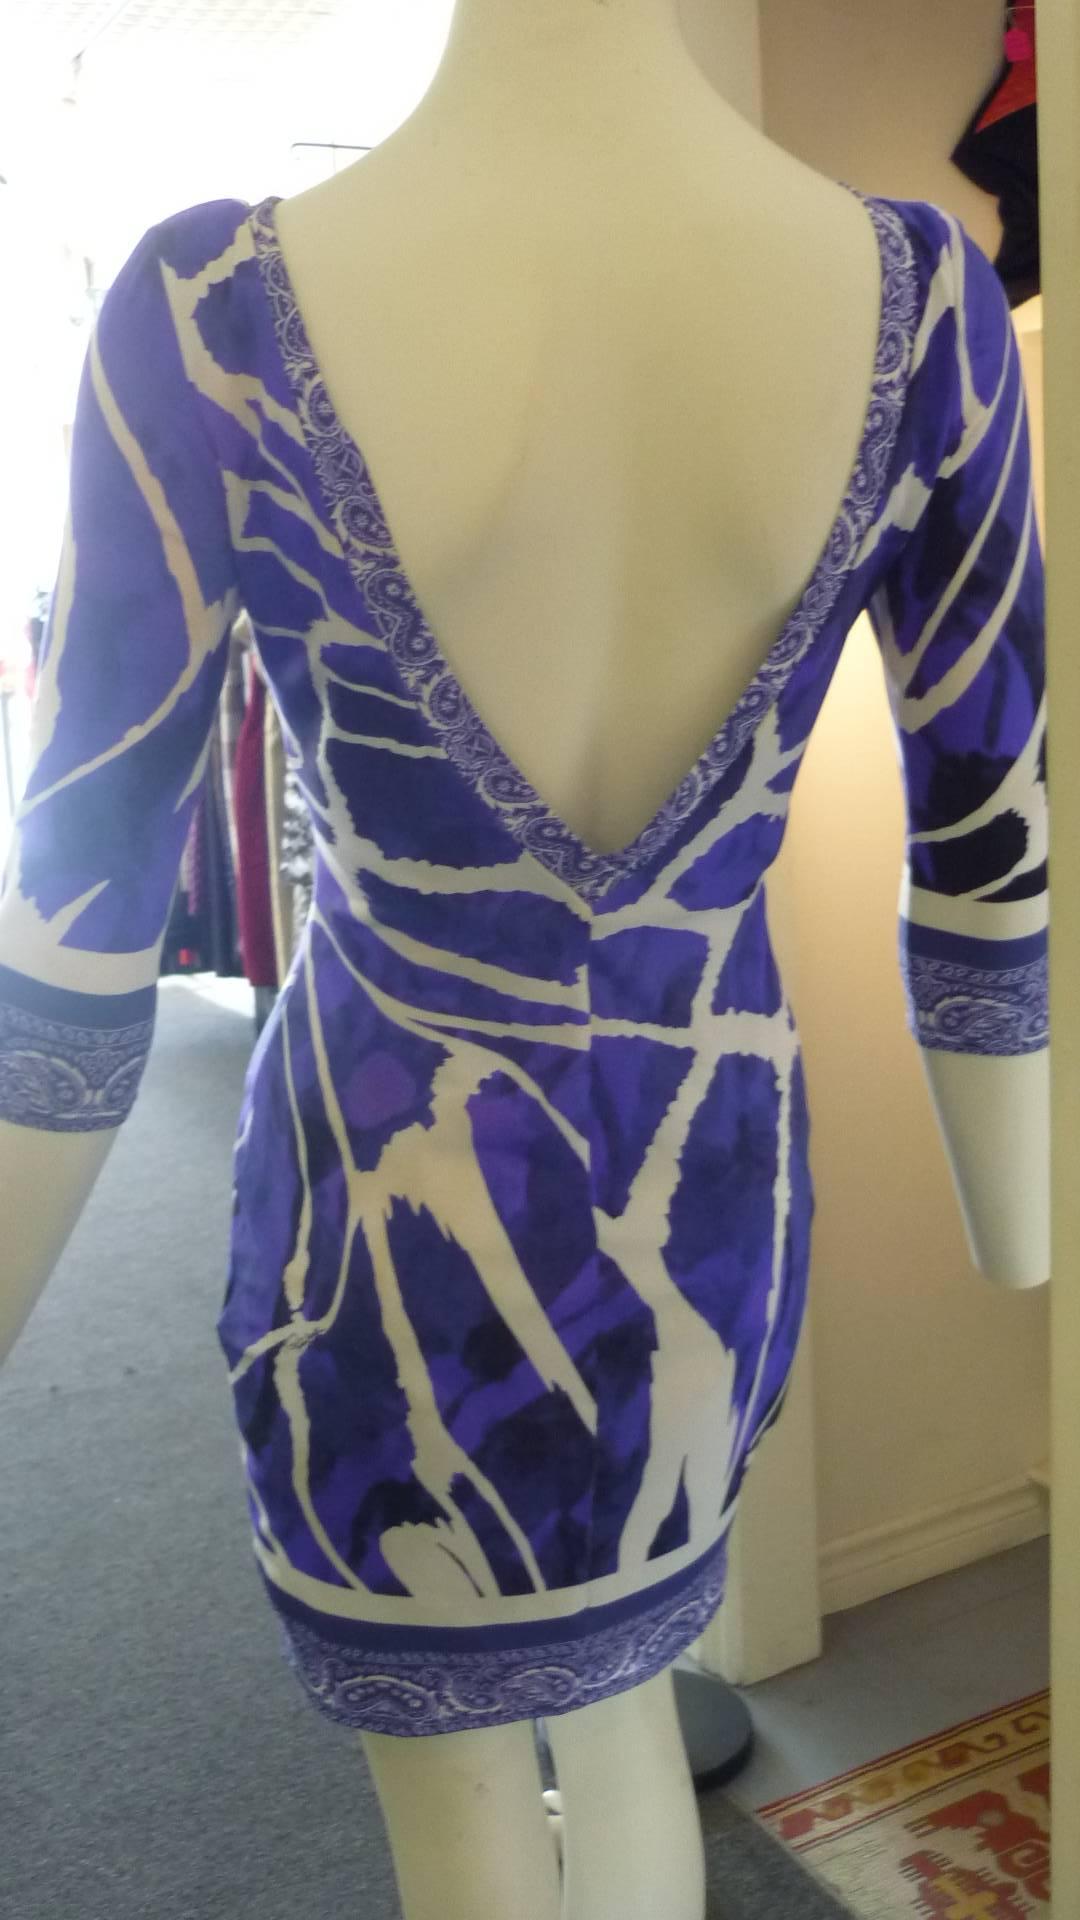 Purples, black and white mixed patterned dress with the Roberto Cavalli signature. Easy to wear and pack, and very becoming.

The material (polyamide) is stretchy and all measurements were taken flat.